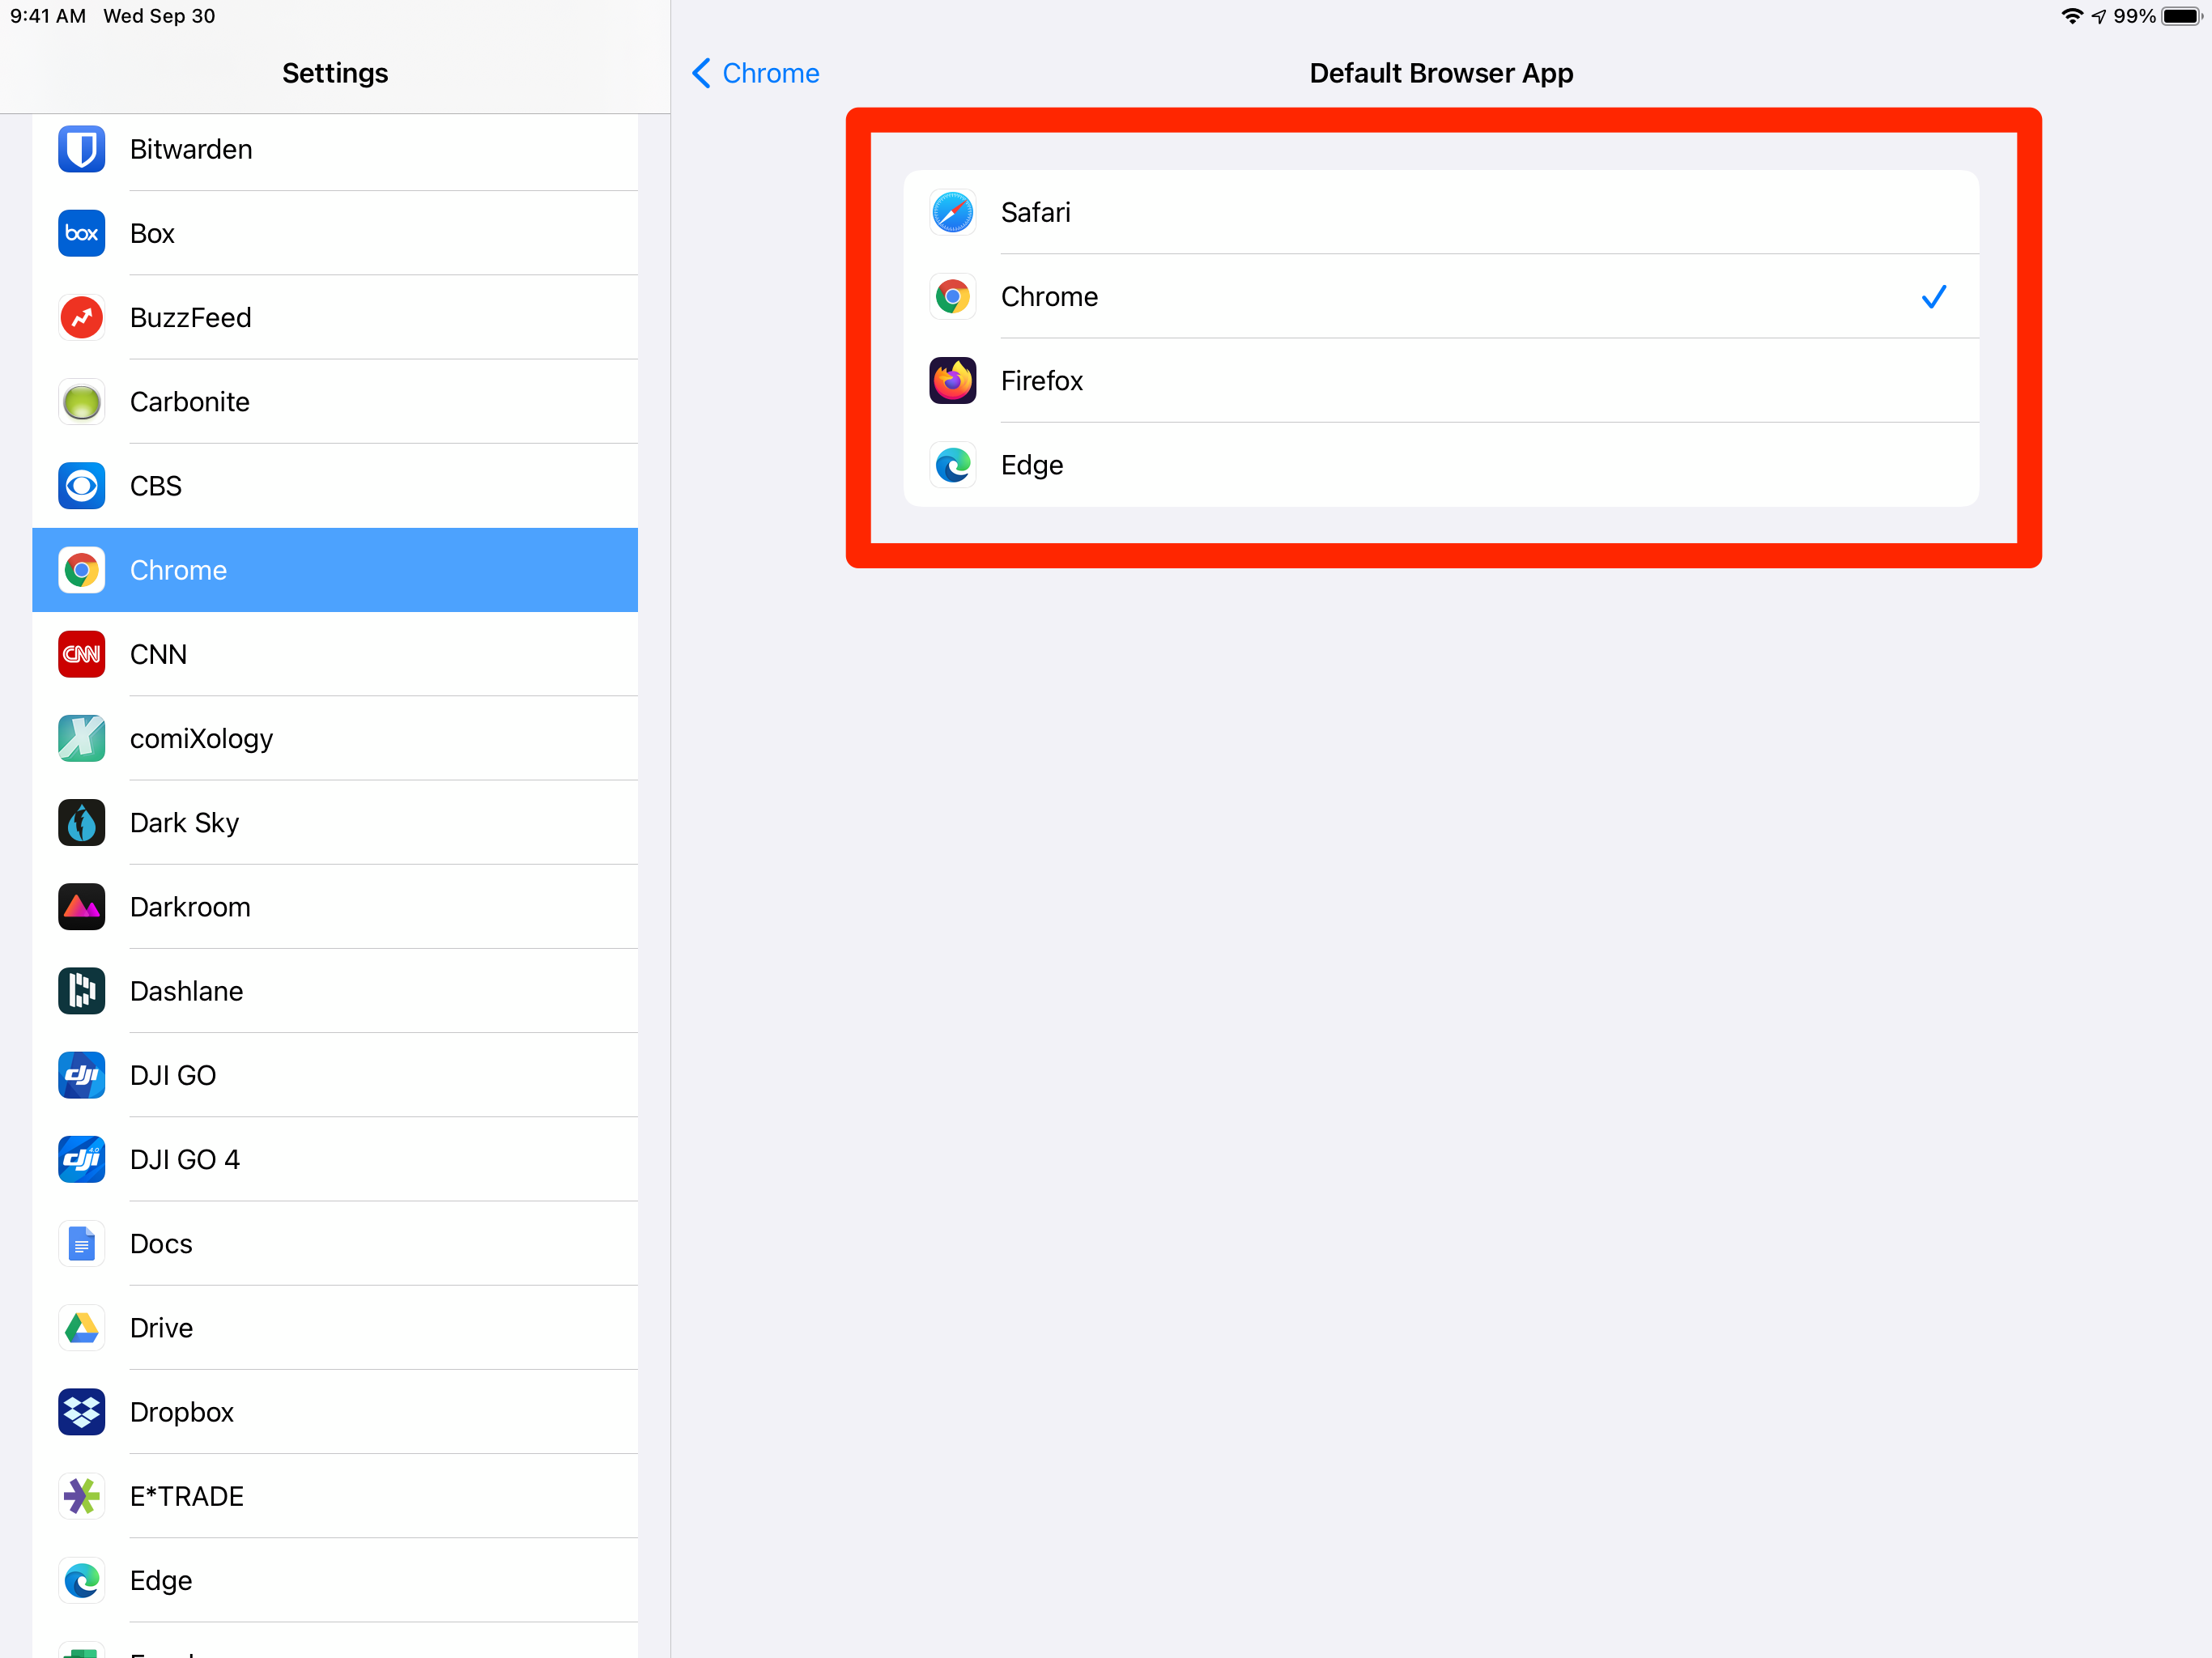 How to set default browser on iPad 3